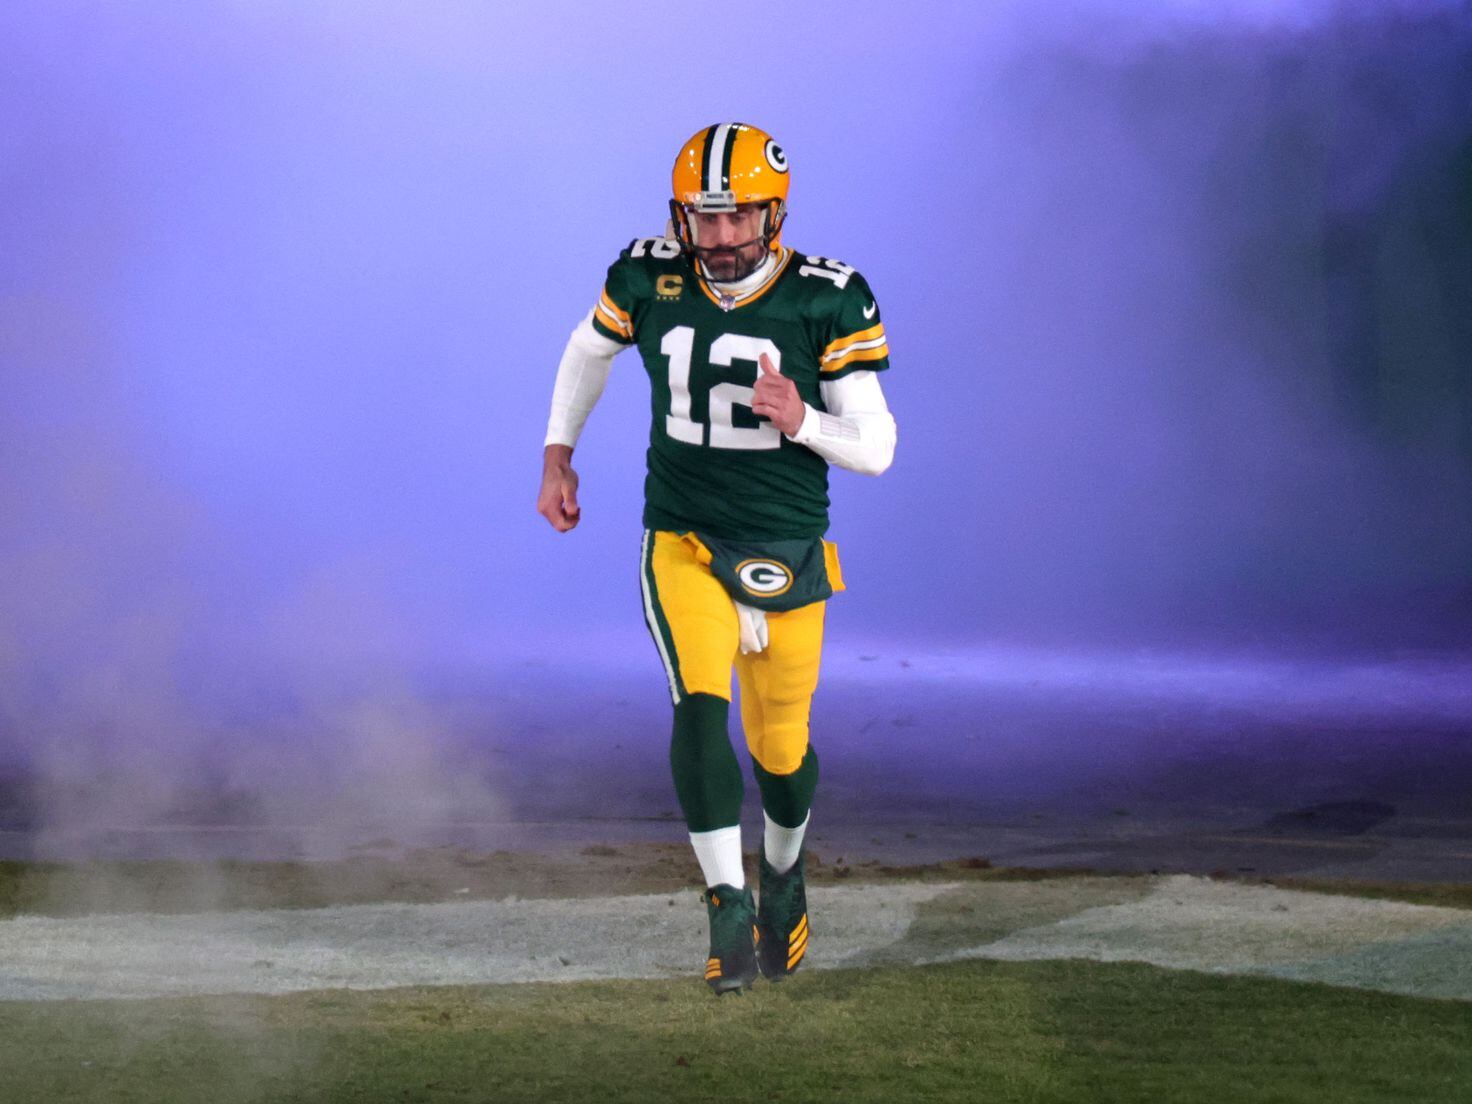 Packers? Jets? Raiders? Where will Aaron Rodgers play next season